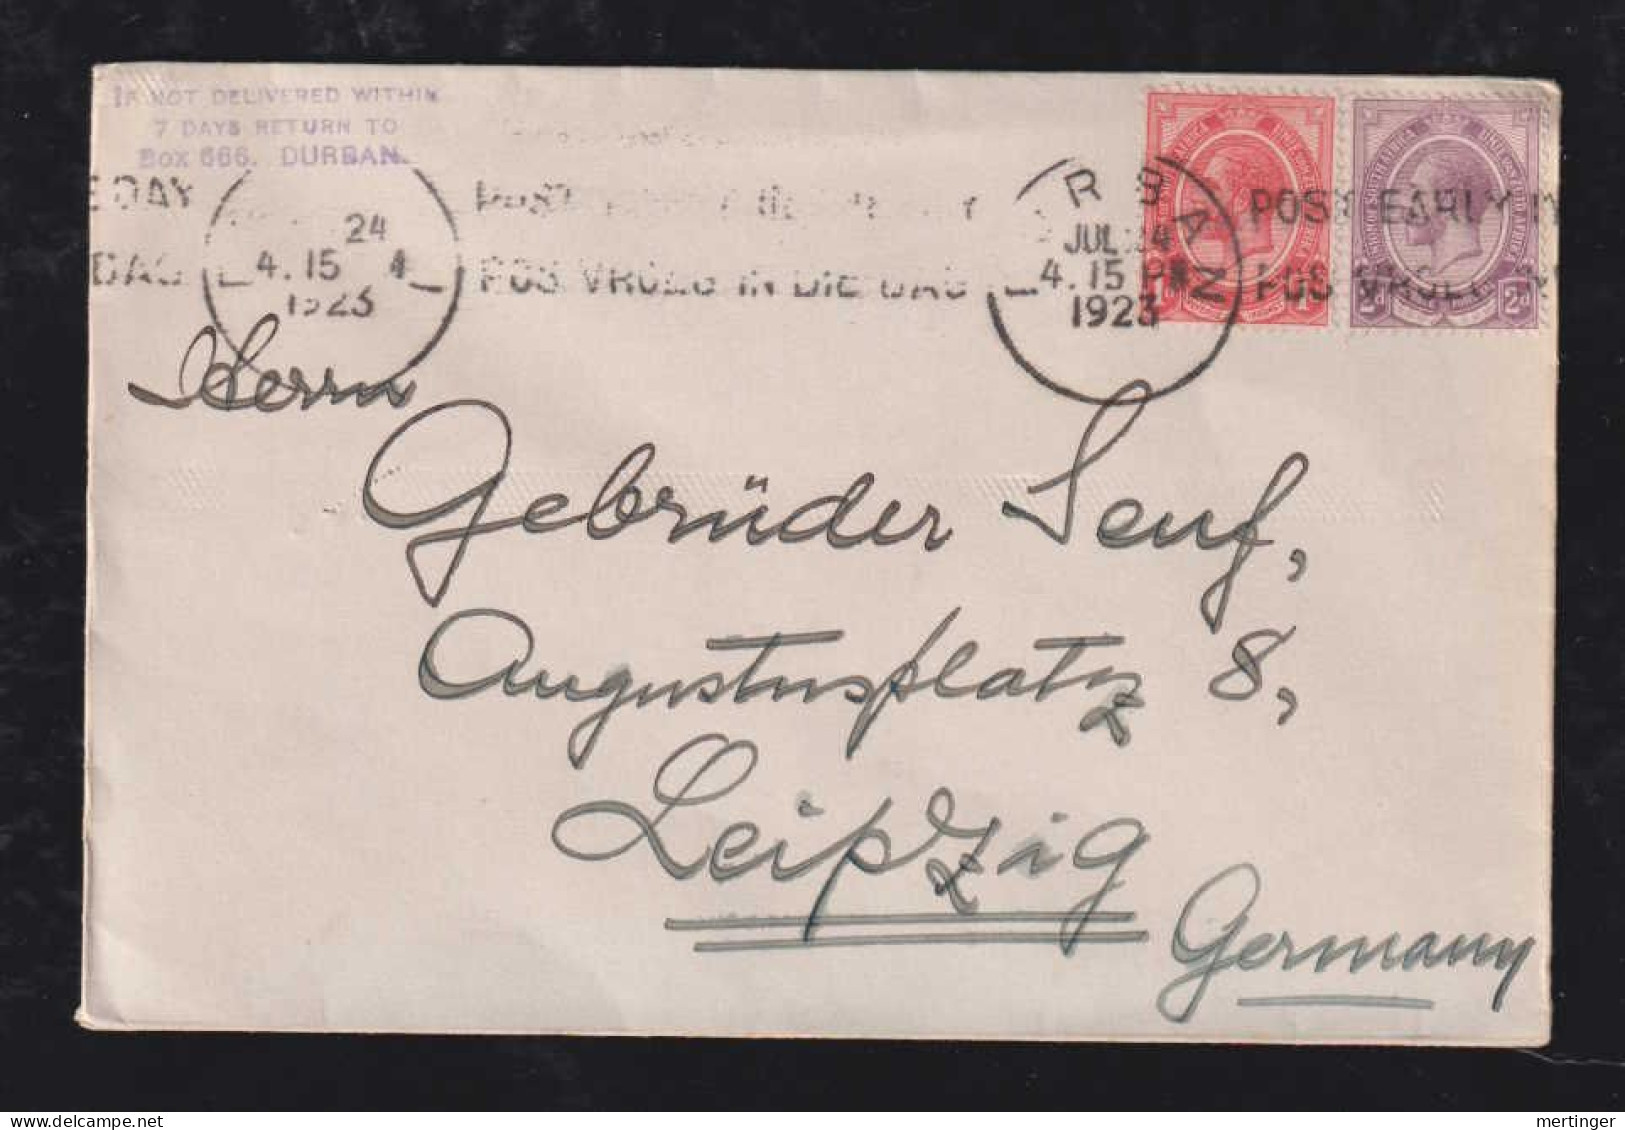 South Africa 1923 Cover 1d + 2d  DURBAN X LEIPZIG Germany - Lettres & Documents